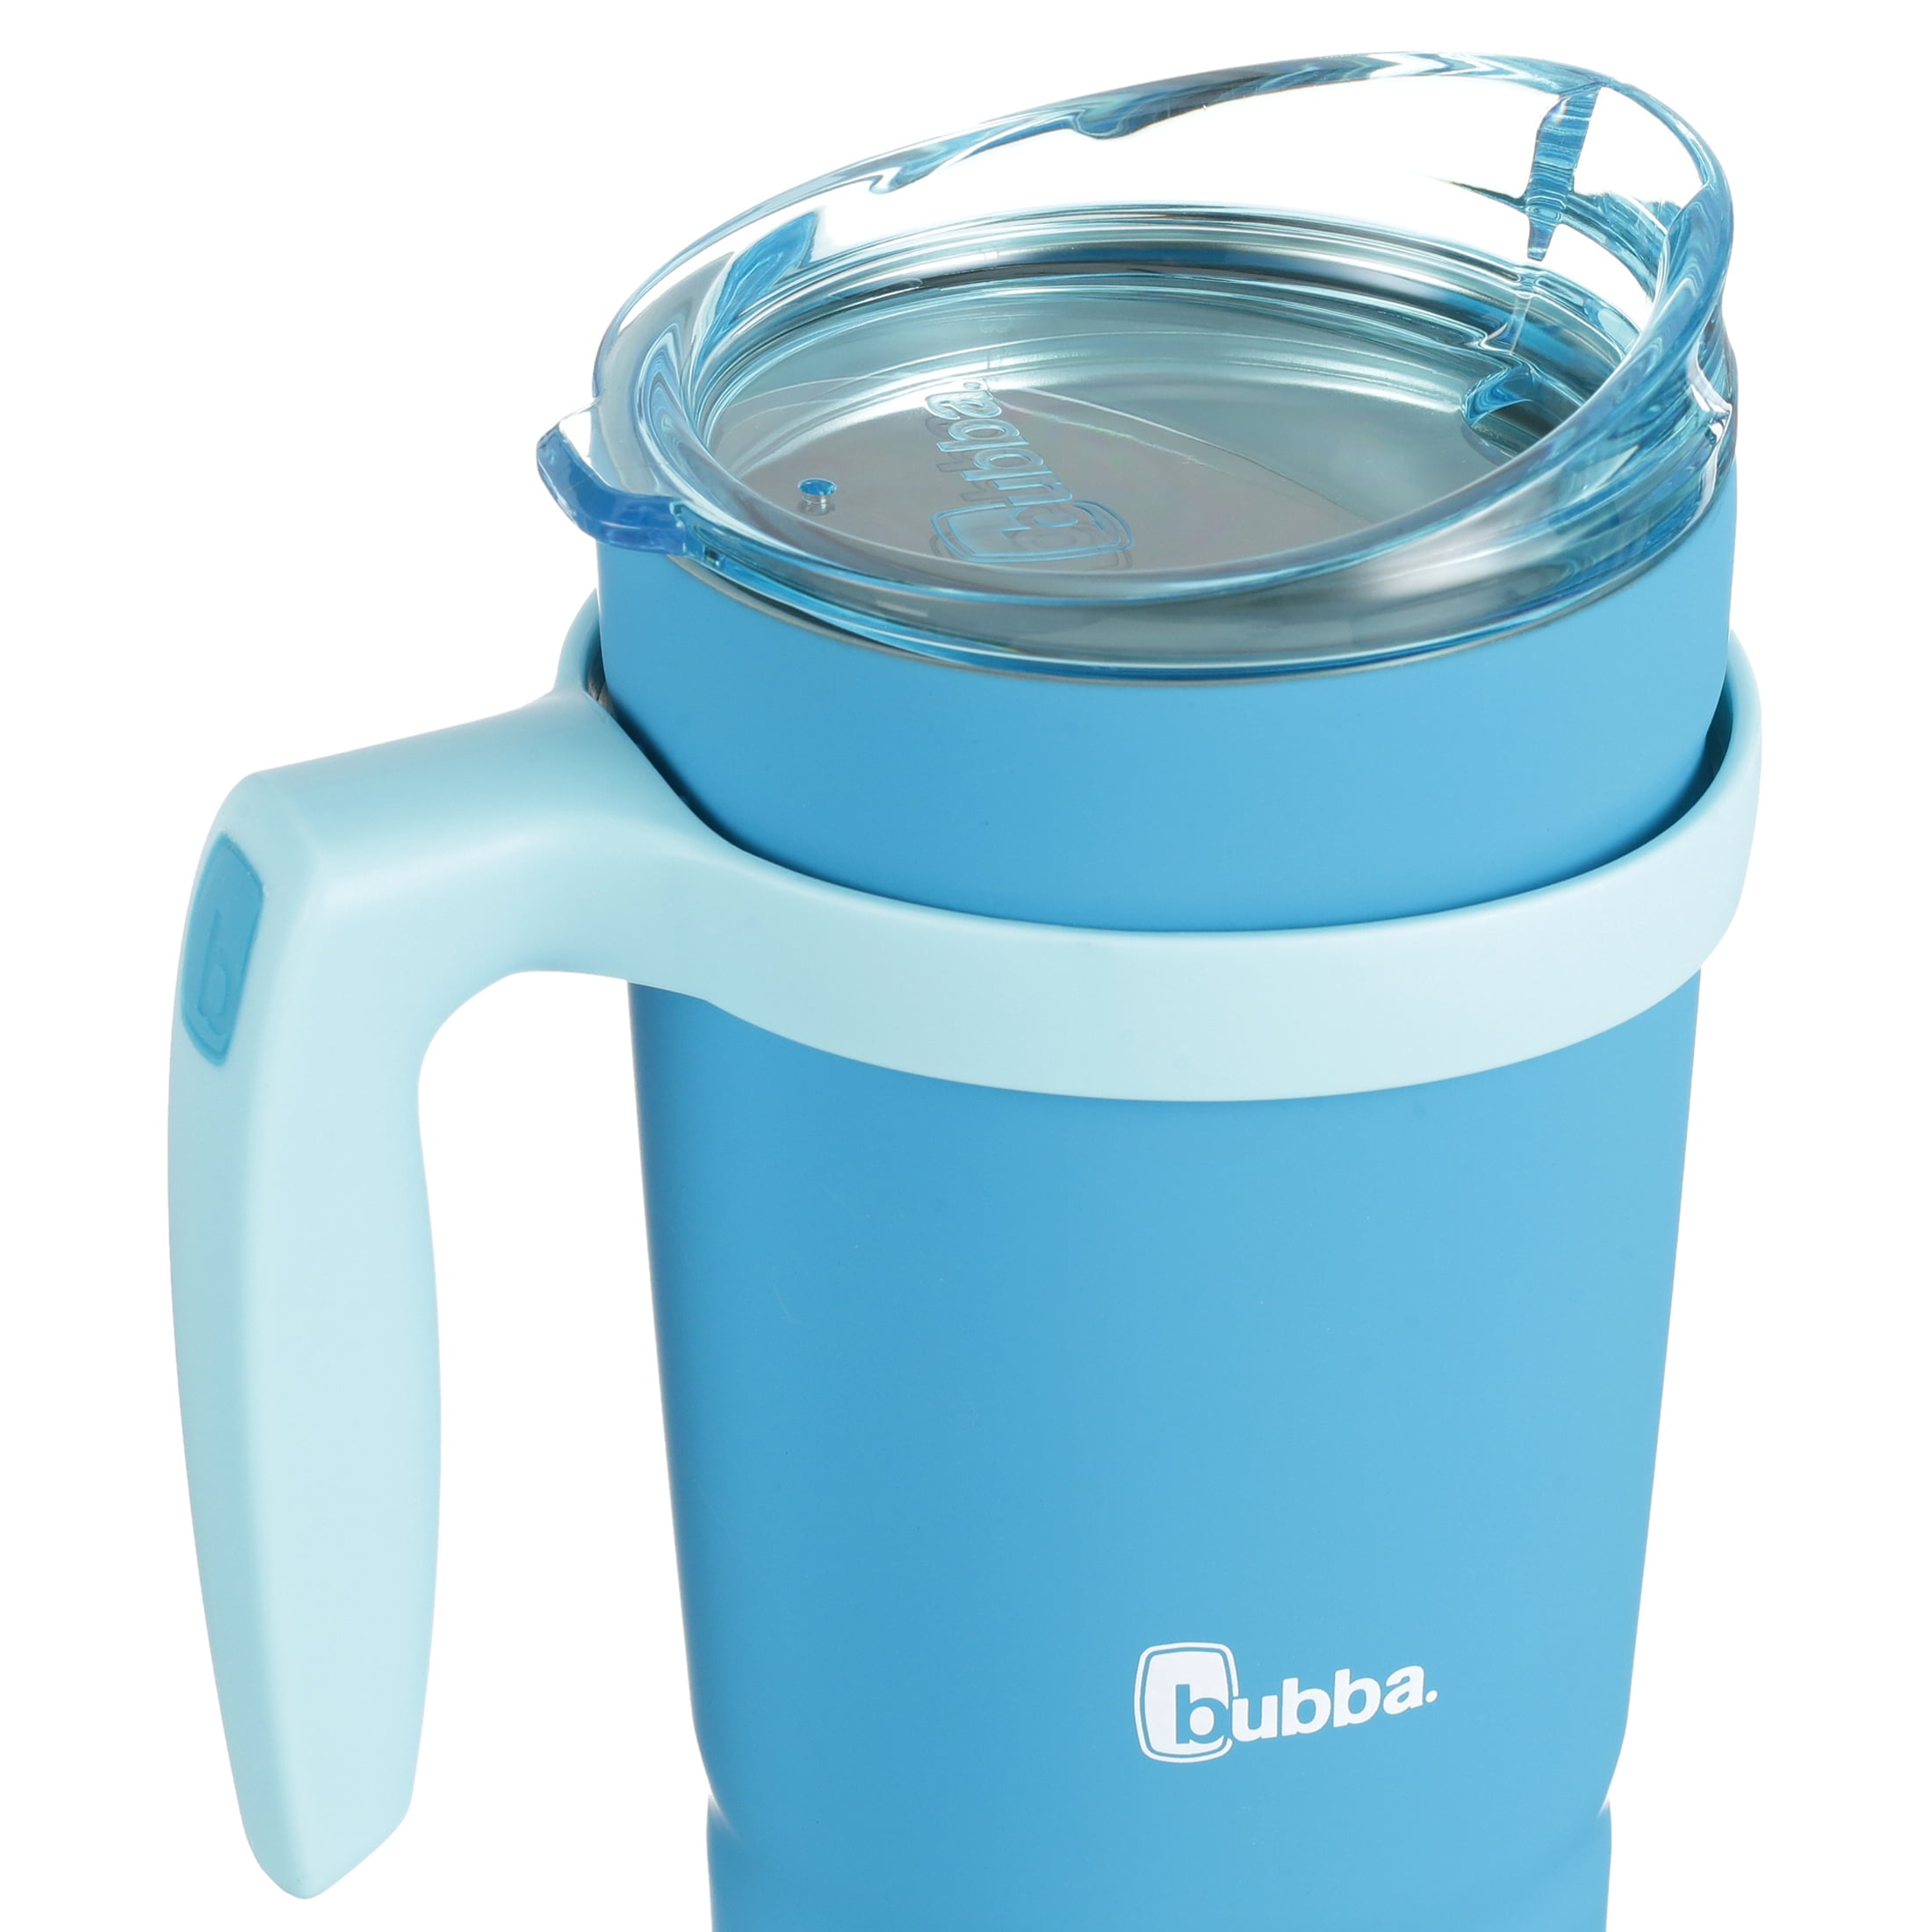 Bubba Envy S 32oz Tumbler with Handle, Bumper and Straw - Island Teal Iridescent, Size: 32 oz, Blue